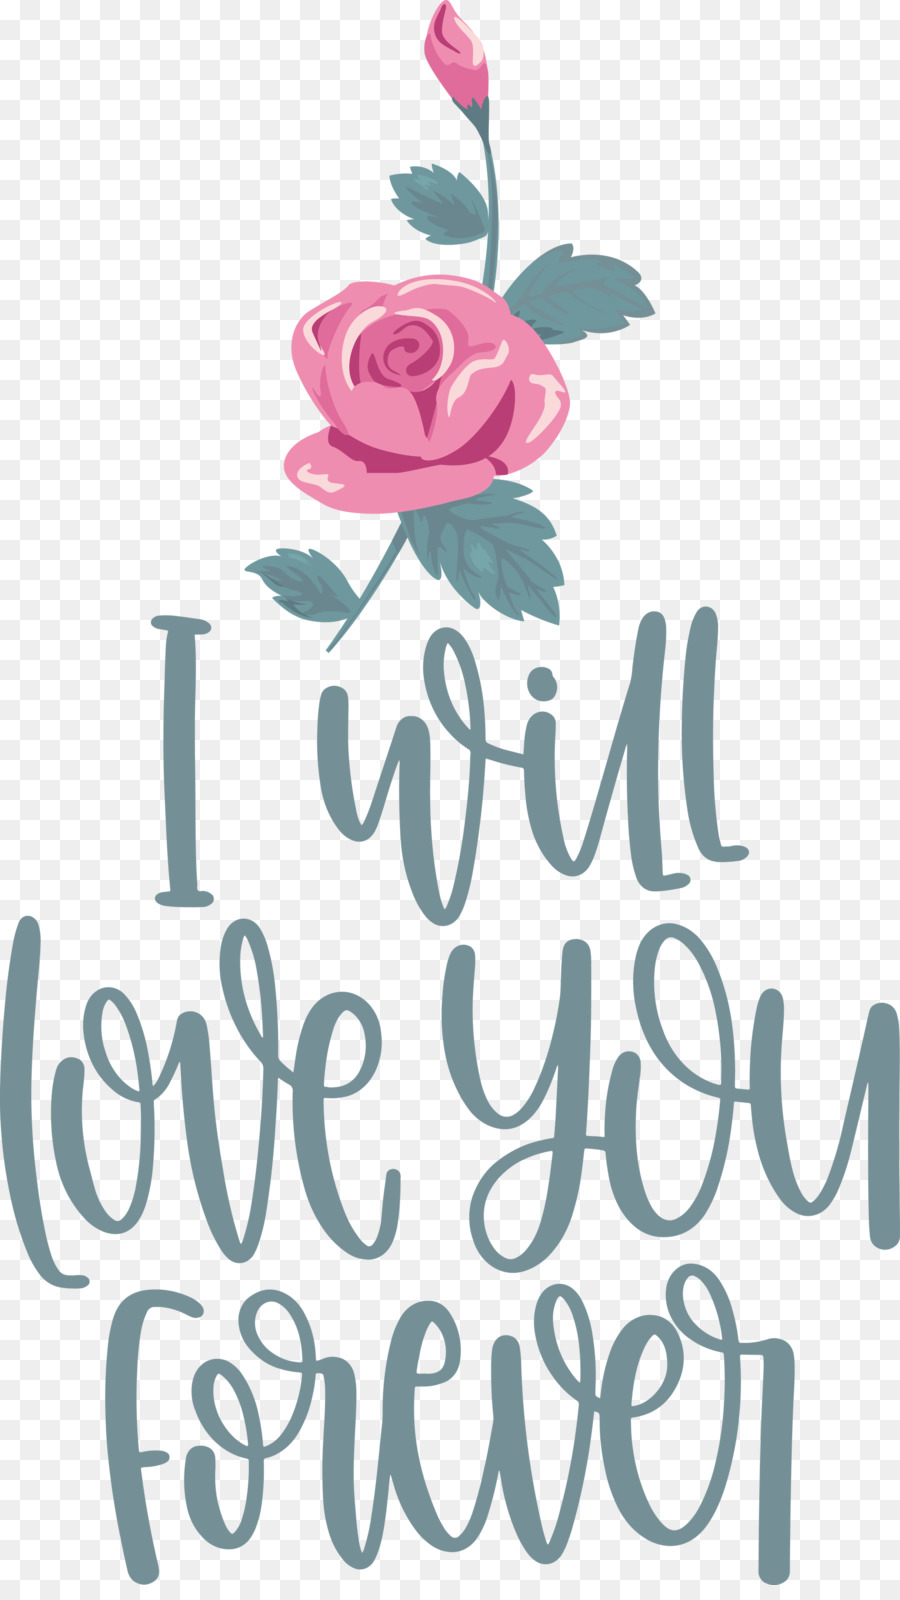 Love You Forever valentines day valentines day quote